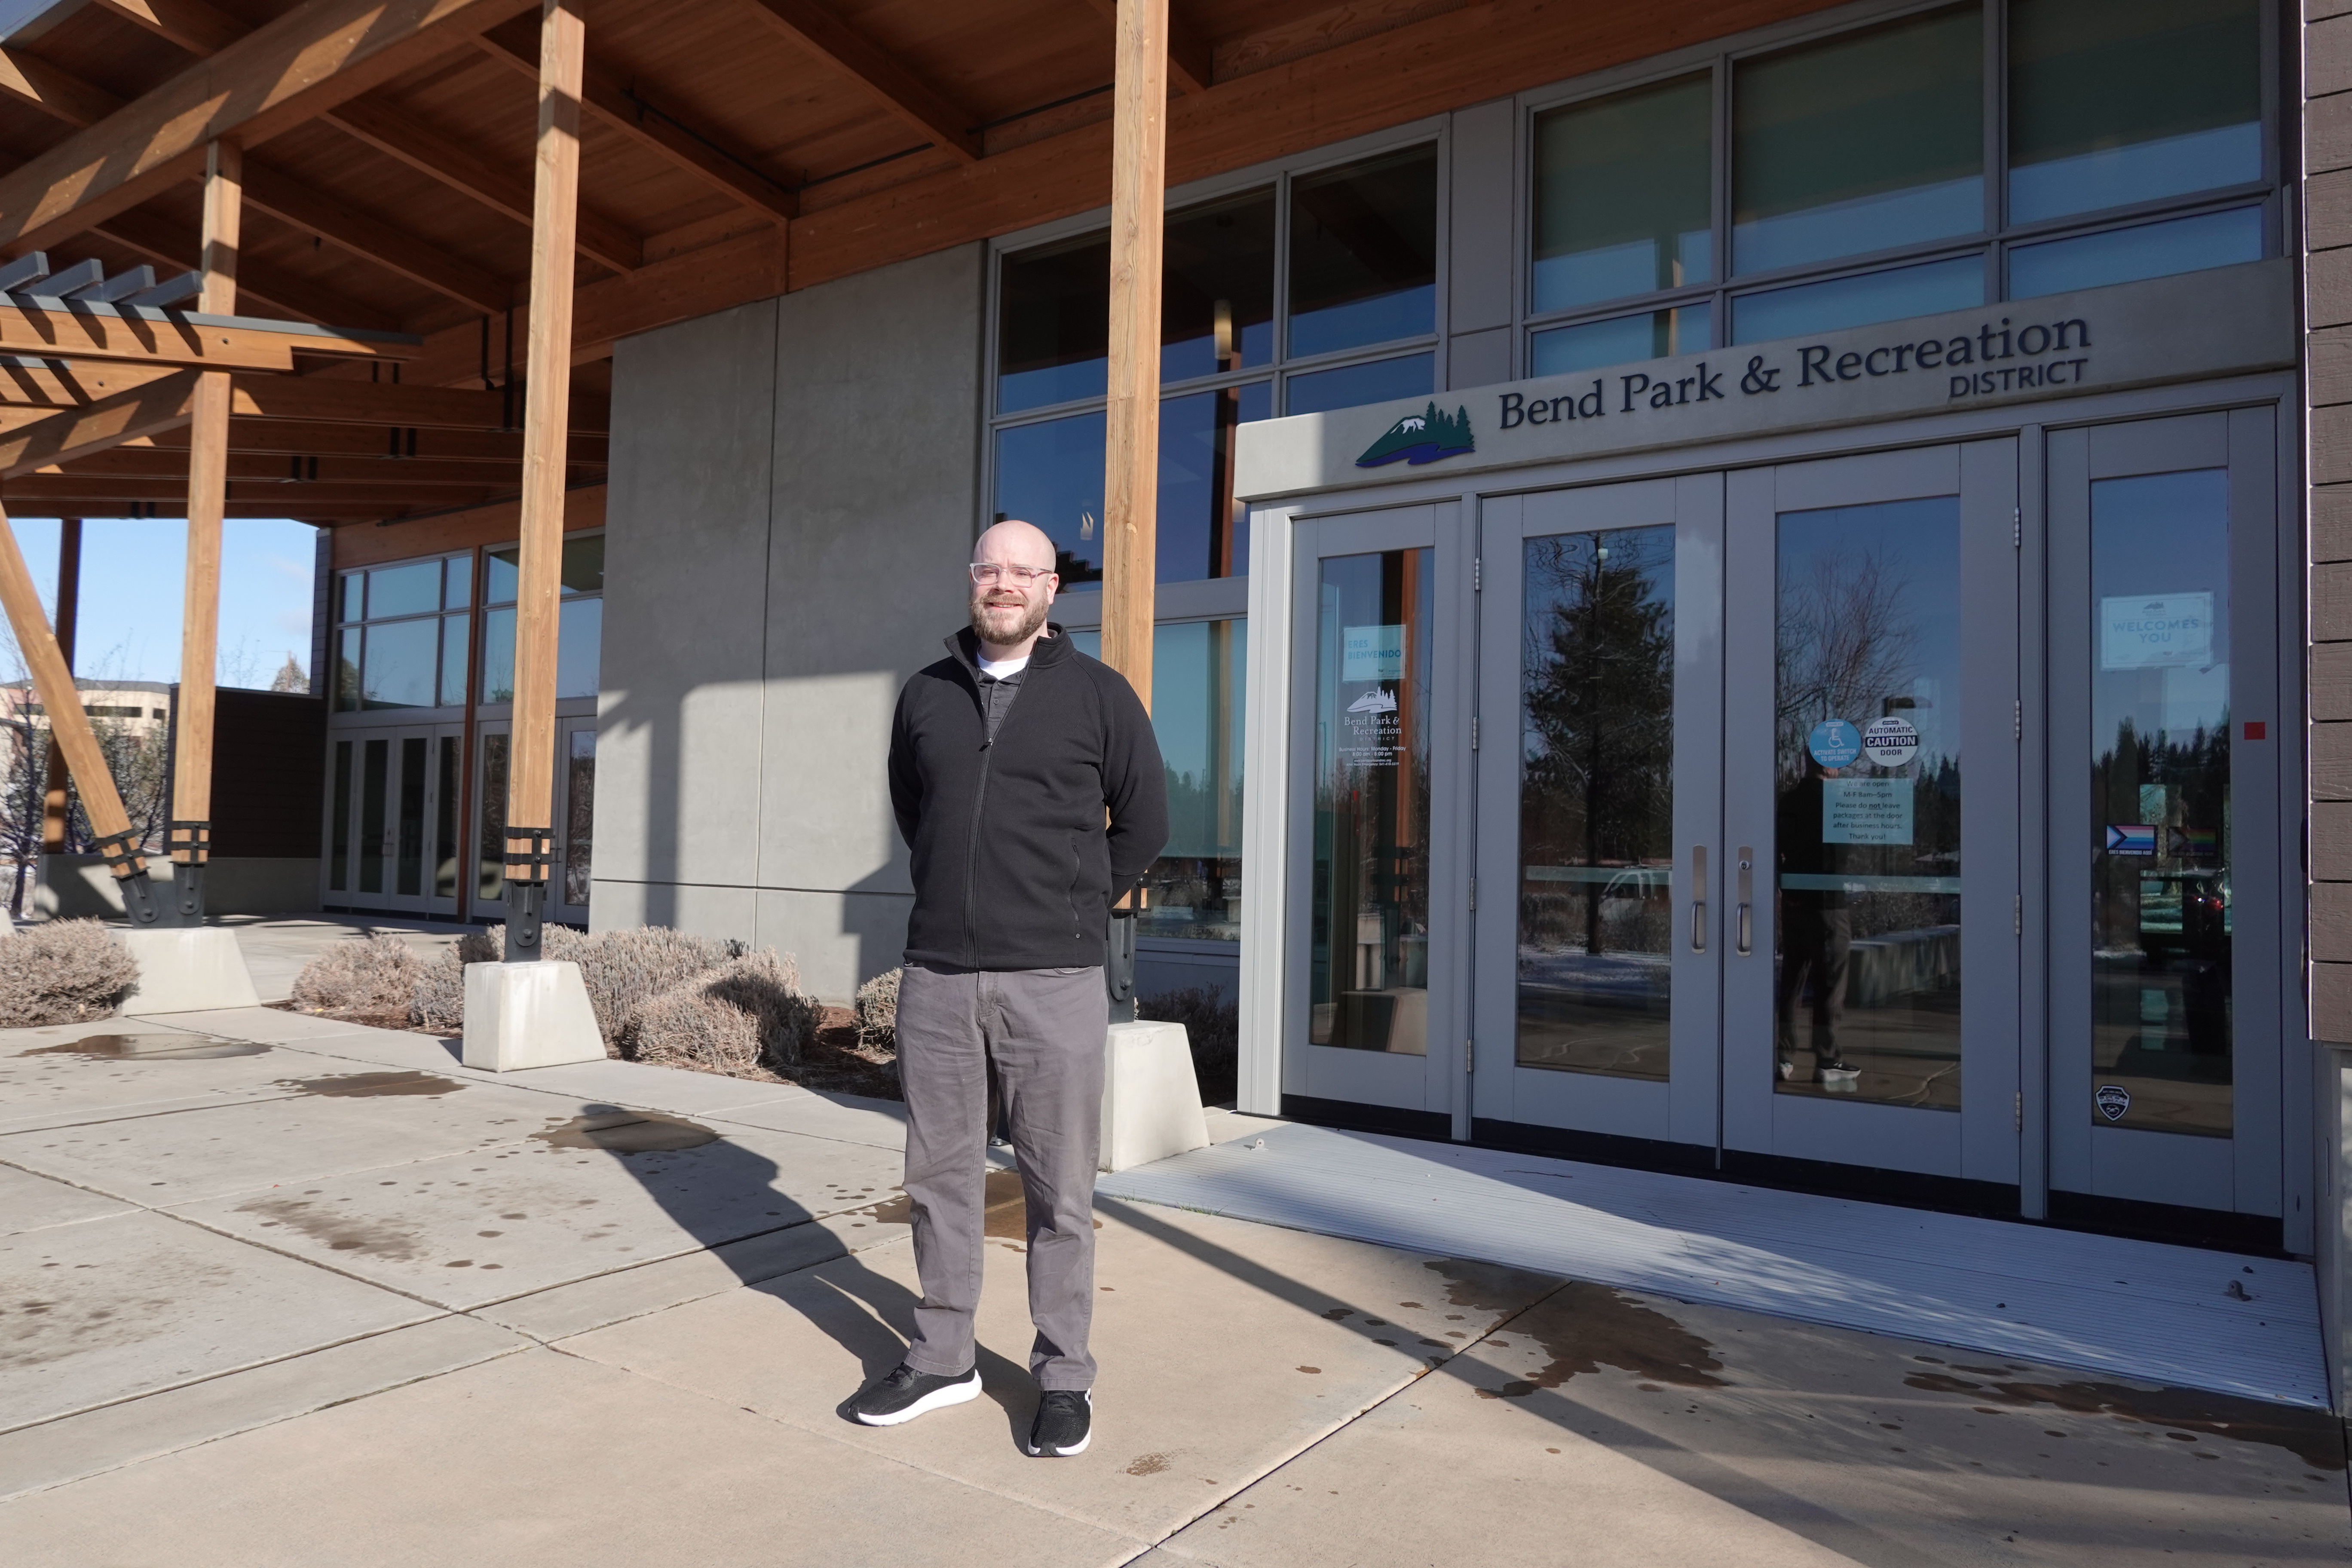 "We are offering more spots than we ever had... It's still not nearly enough," says Michael Egging, a recreation business manager with BPRD, at the district's office on March 15, 2023.